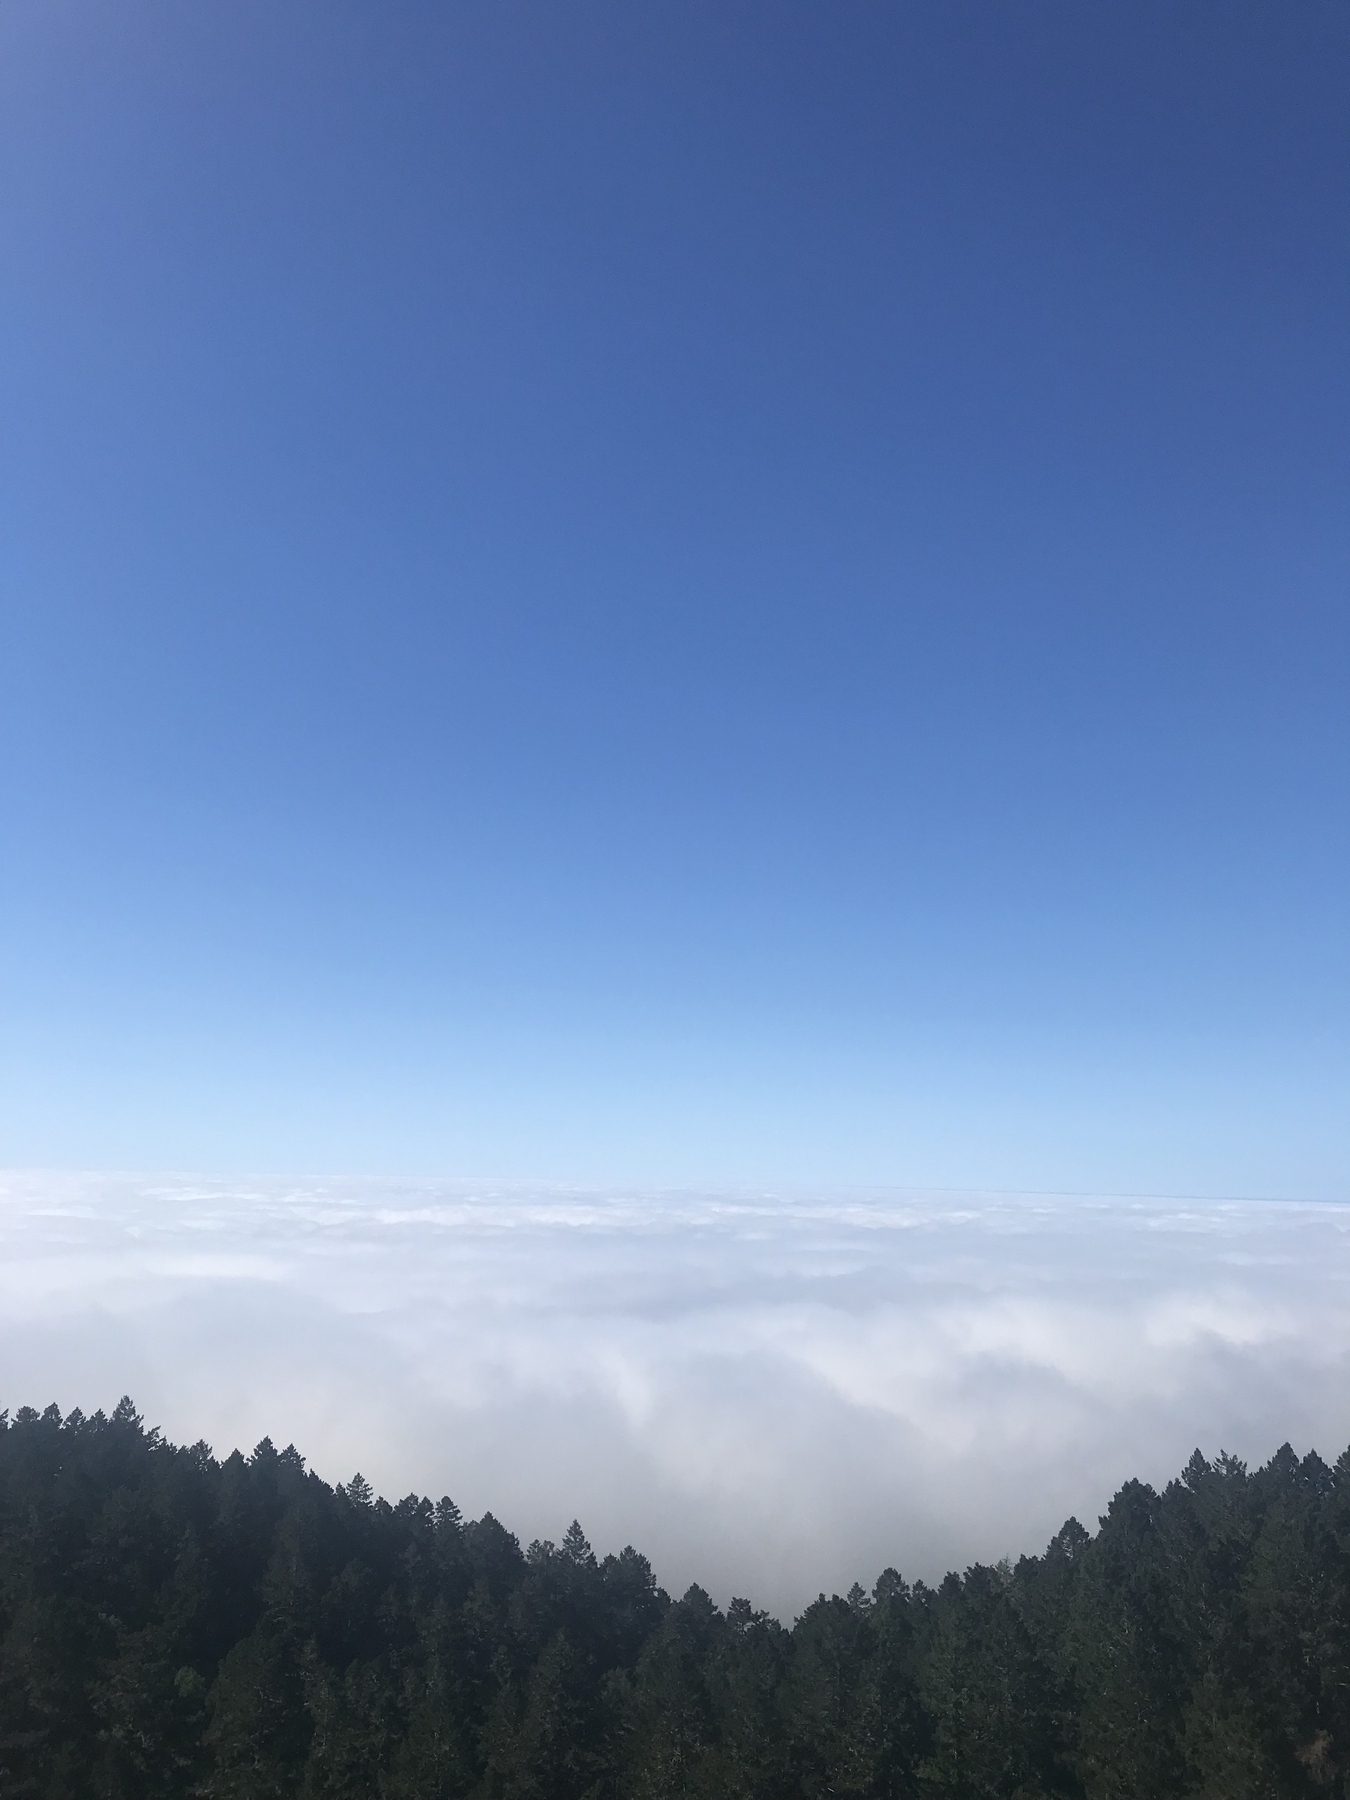 Photo taken from a high altitude where you see the blue sky, clouds below it and the top of trees in a forest (in that order from the top)